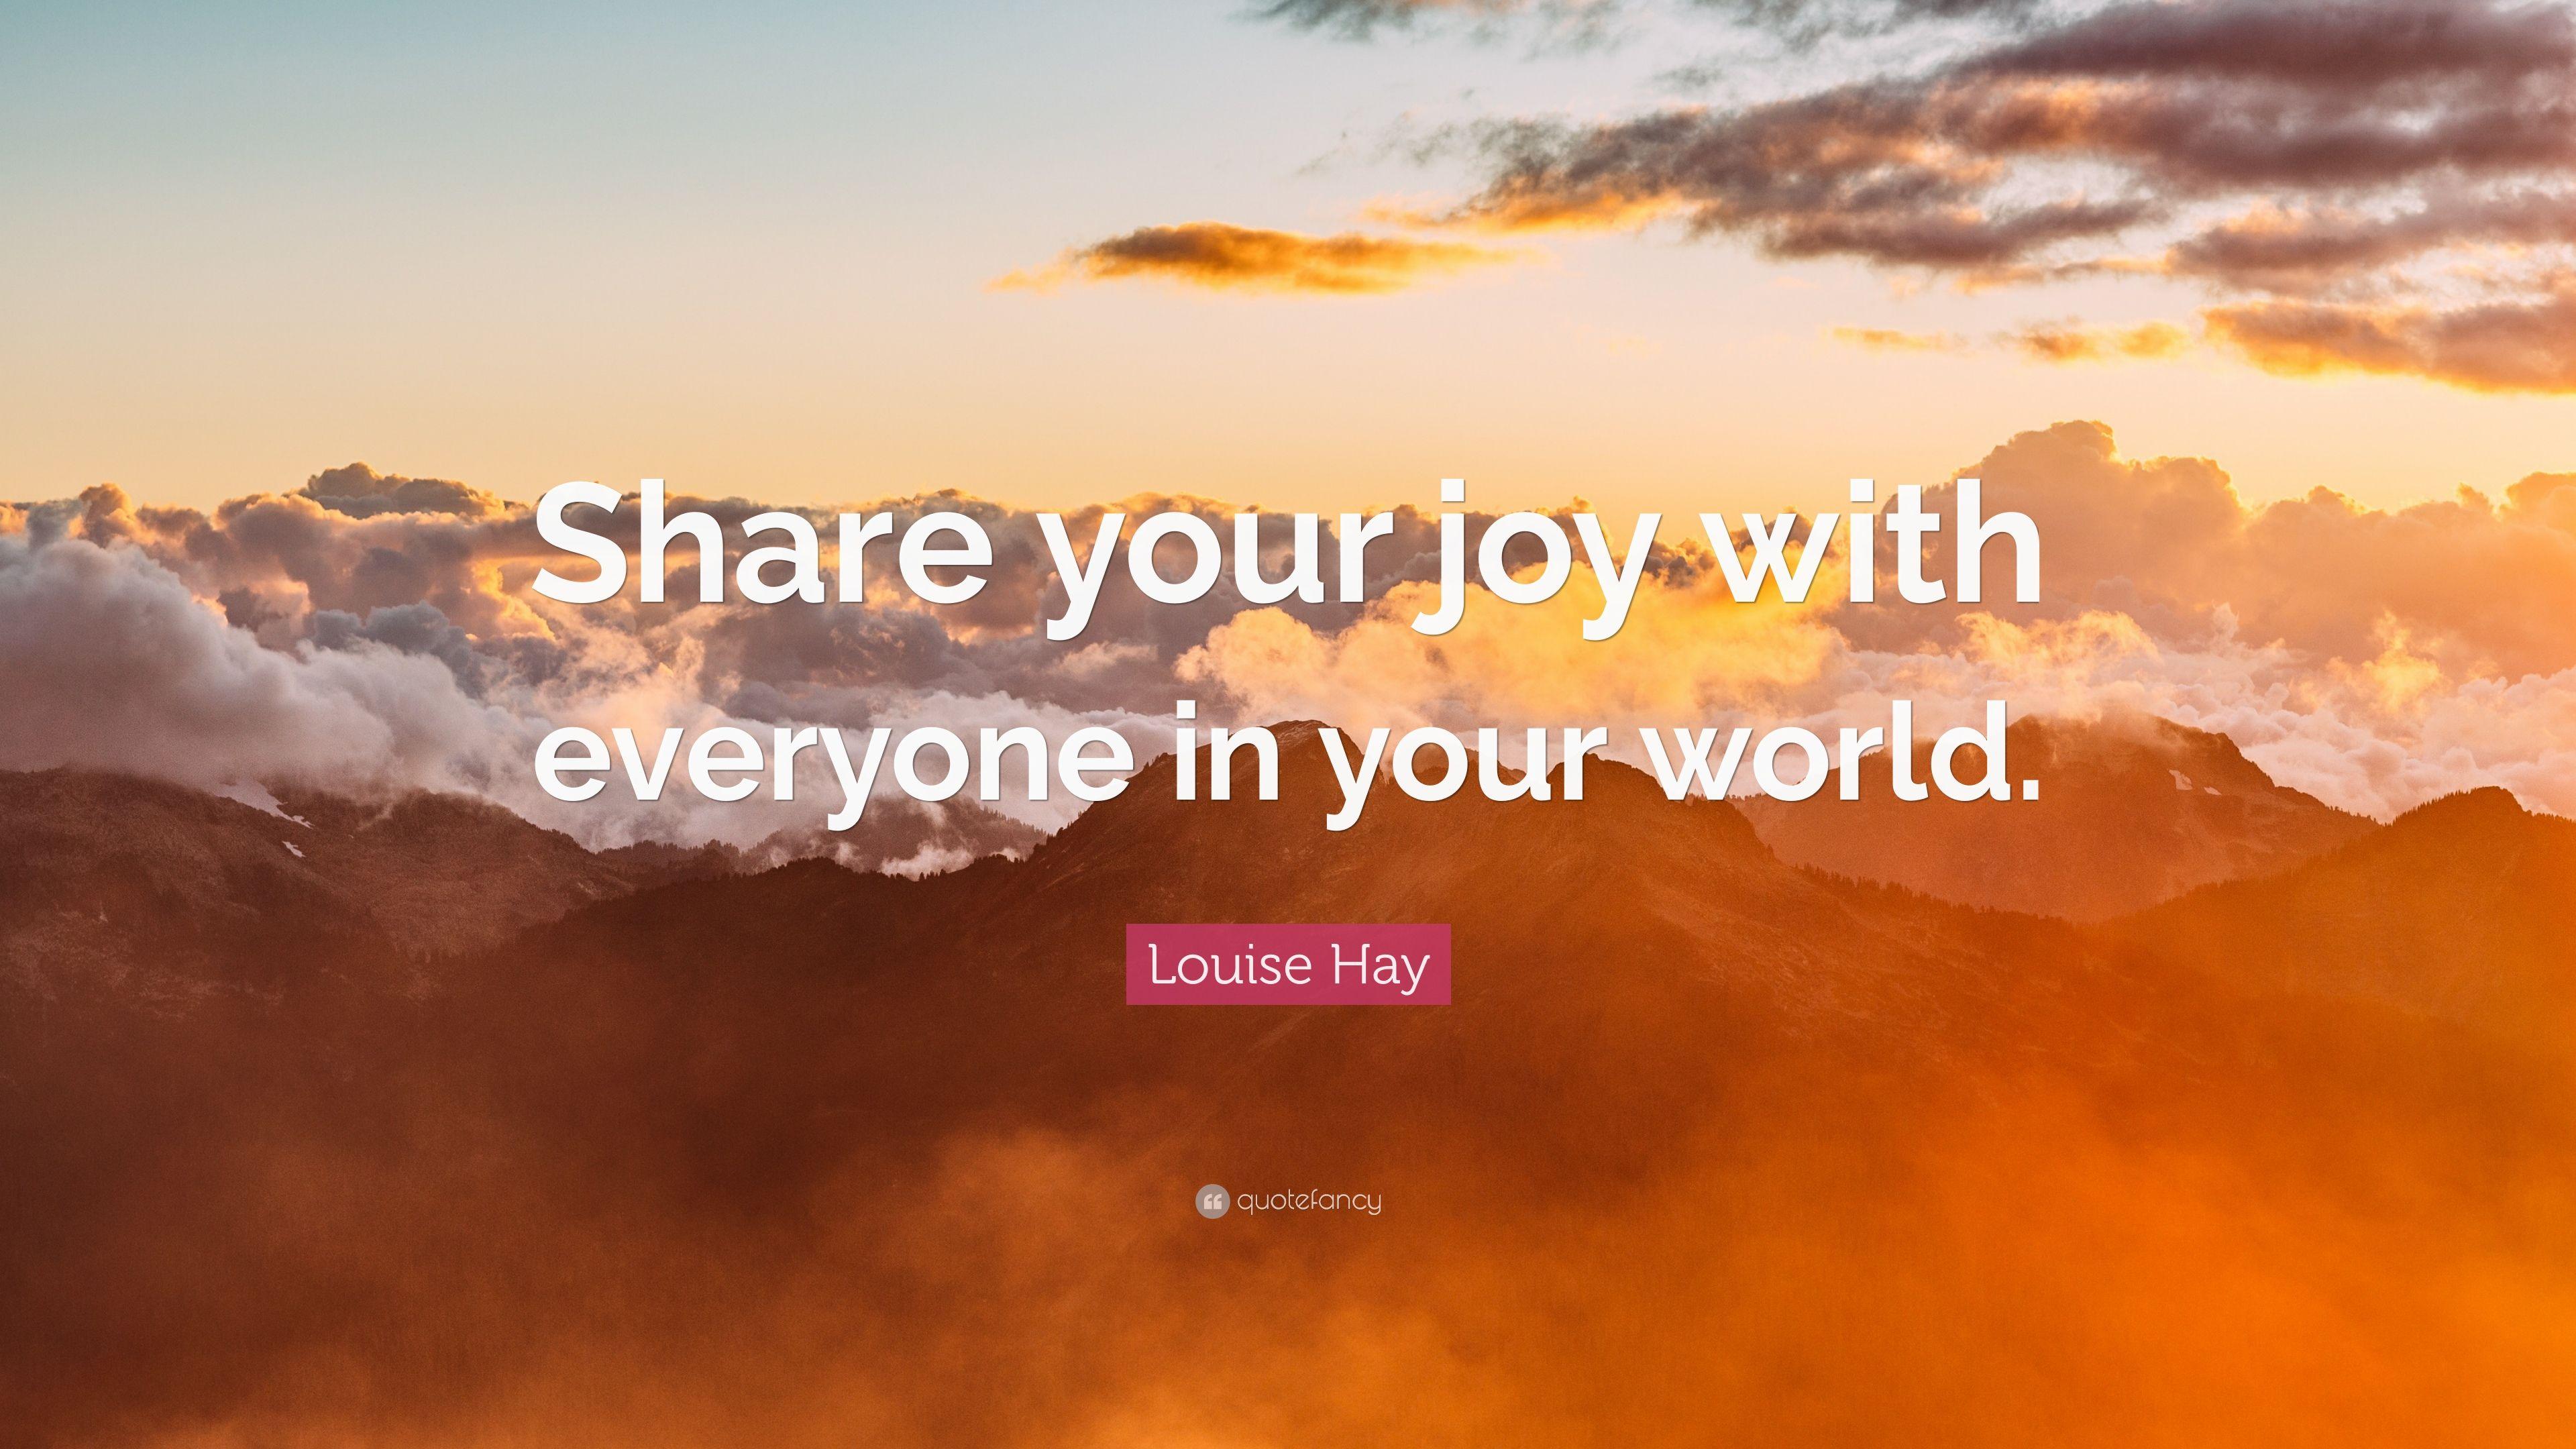 Louise Hay Quote: “Share your joy with everyone in your world